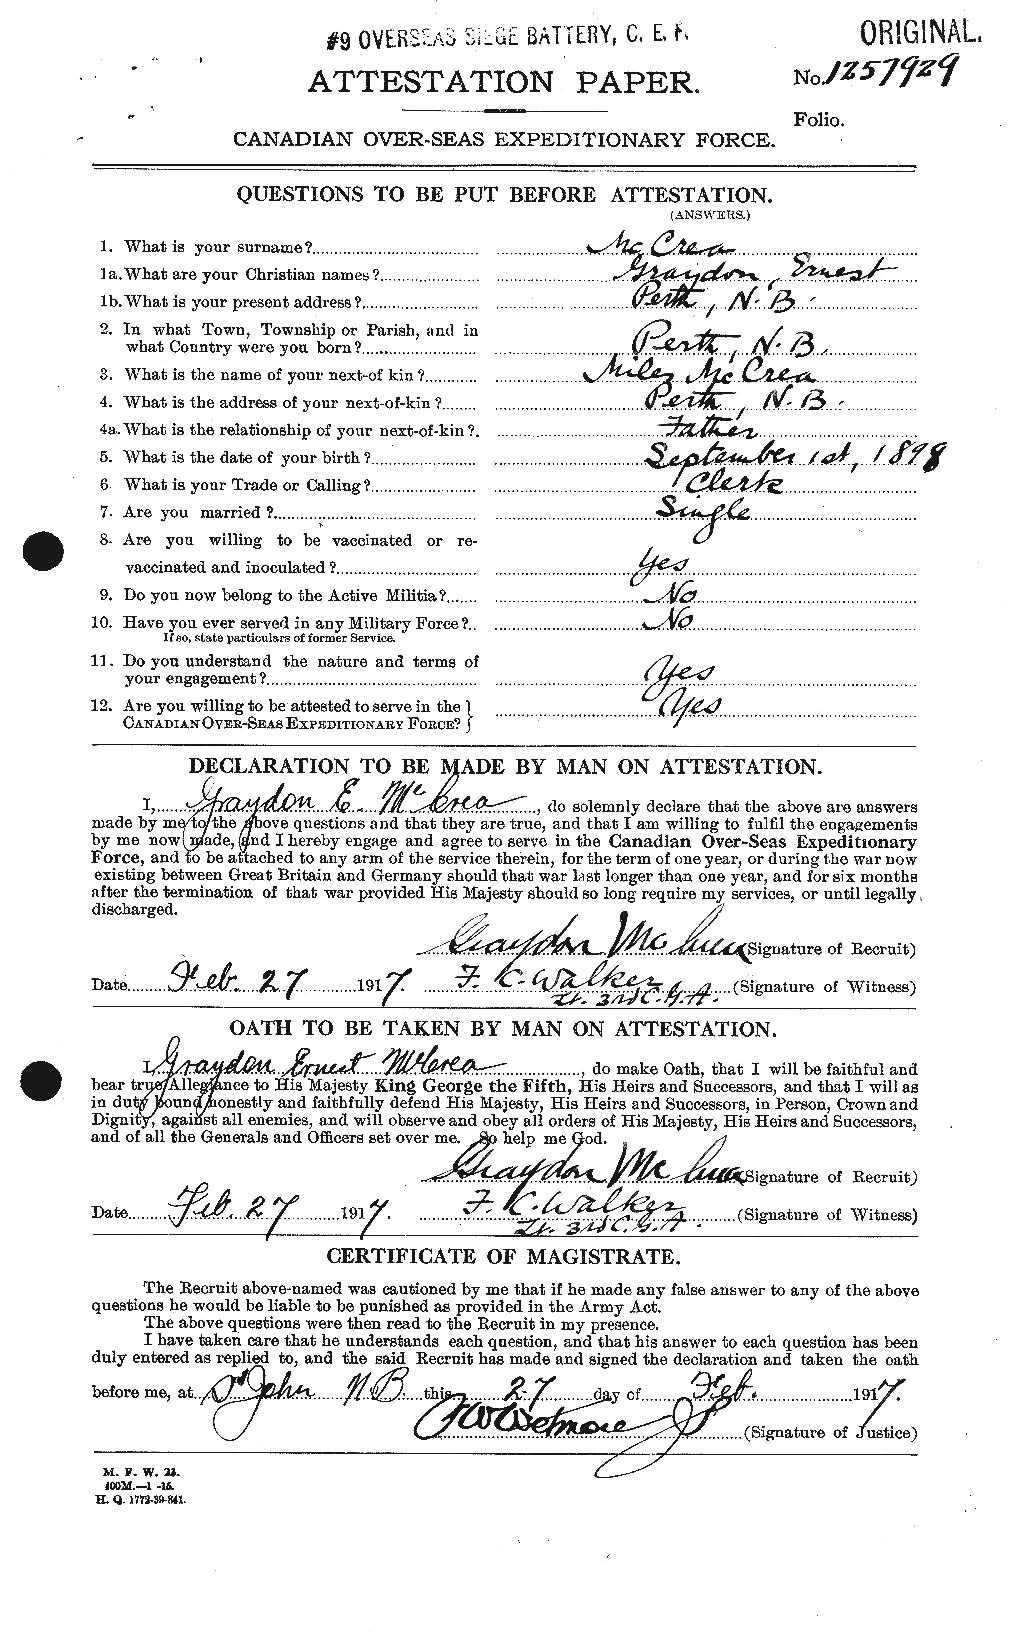 Personnel Records of the First World War - CEF 134486a